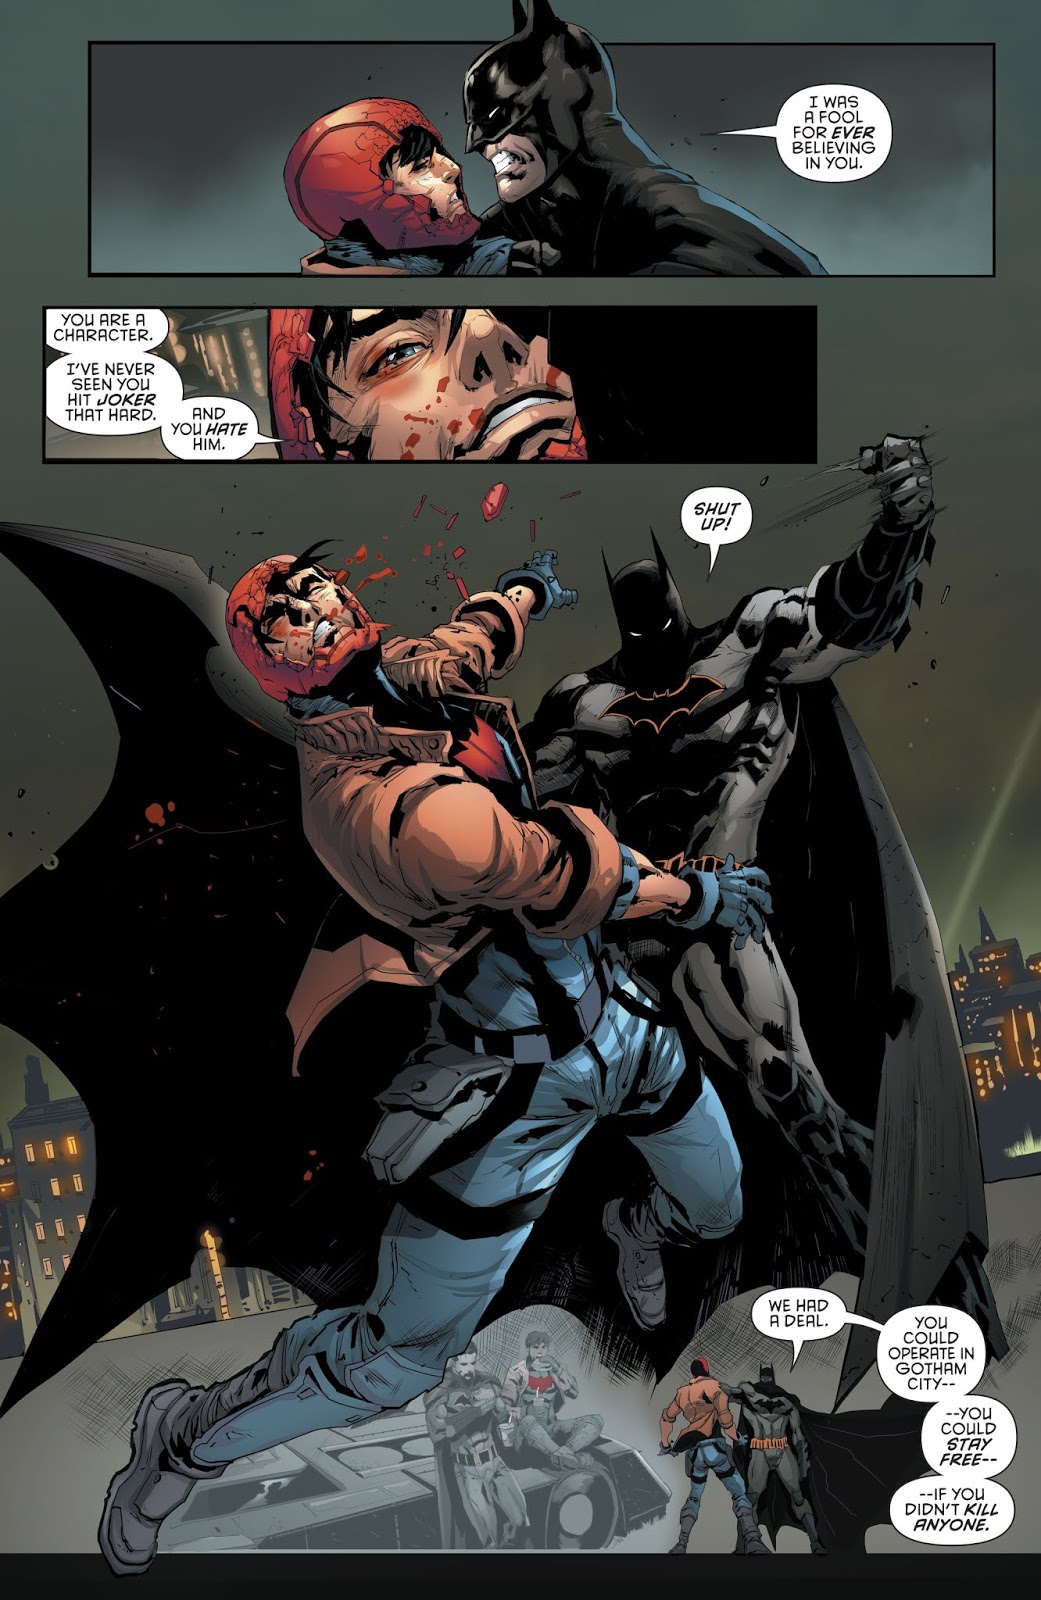 Red Hood VS Batman (Red Hood and the Outlaws Vol. 2 #25)